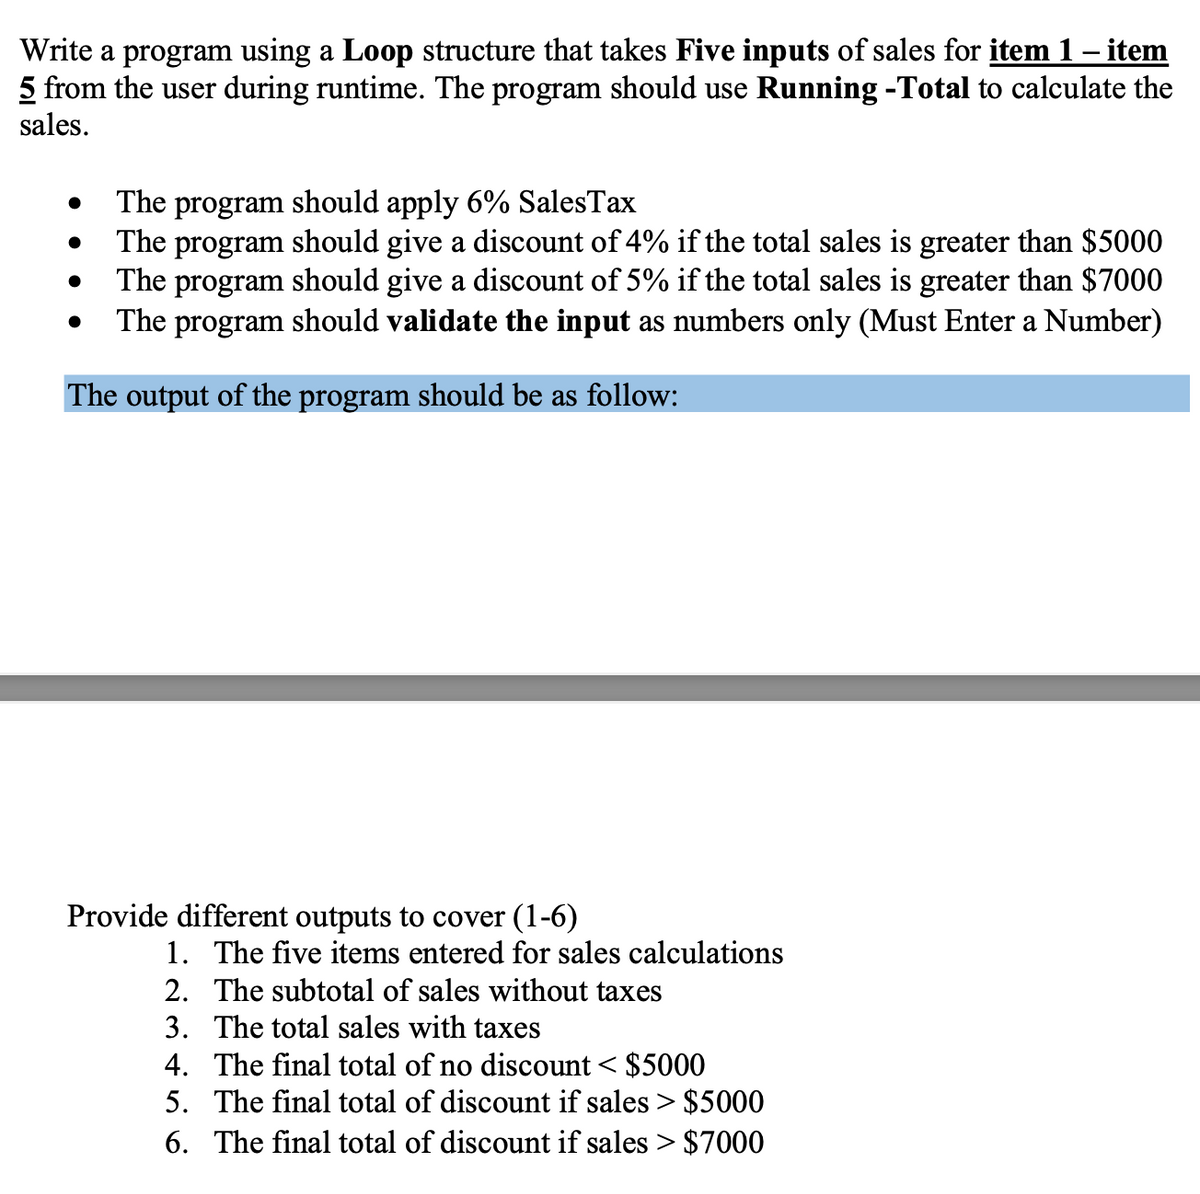 Write a program using a Loop structure that takes Five inputs of sales for item 1 – item
5 from the user during runtime. The program should use Running -Total to calculate the
sales.
The
should apply 6% SalesTax
program
The program should give a discount of 4% if the total sales is greater than $5000
The program should give a discount of 5% if the total sales is greater than $7000
The program should validate the input as numbers only (Must Enter a Number)
The output of the program should be as follow:
Provide different outputs to cover (1-6)
1. The five items entered for sales calculations
2. The subtotal of sales without taxes
3. The total sales with taxes
4. The final total of no discount < $5000
5. The final total of discount if sales > $5000
6. The final total of discount if sales > $7000
